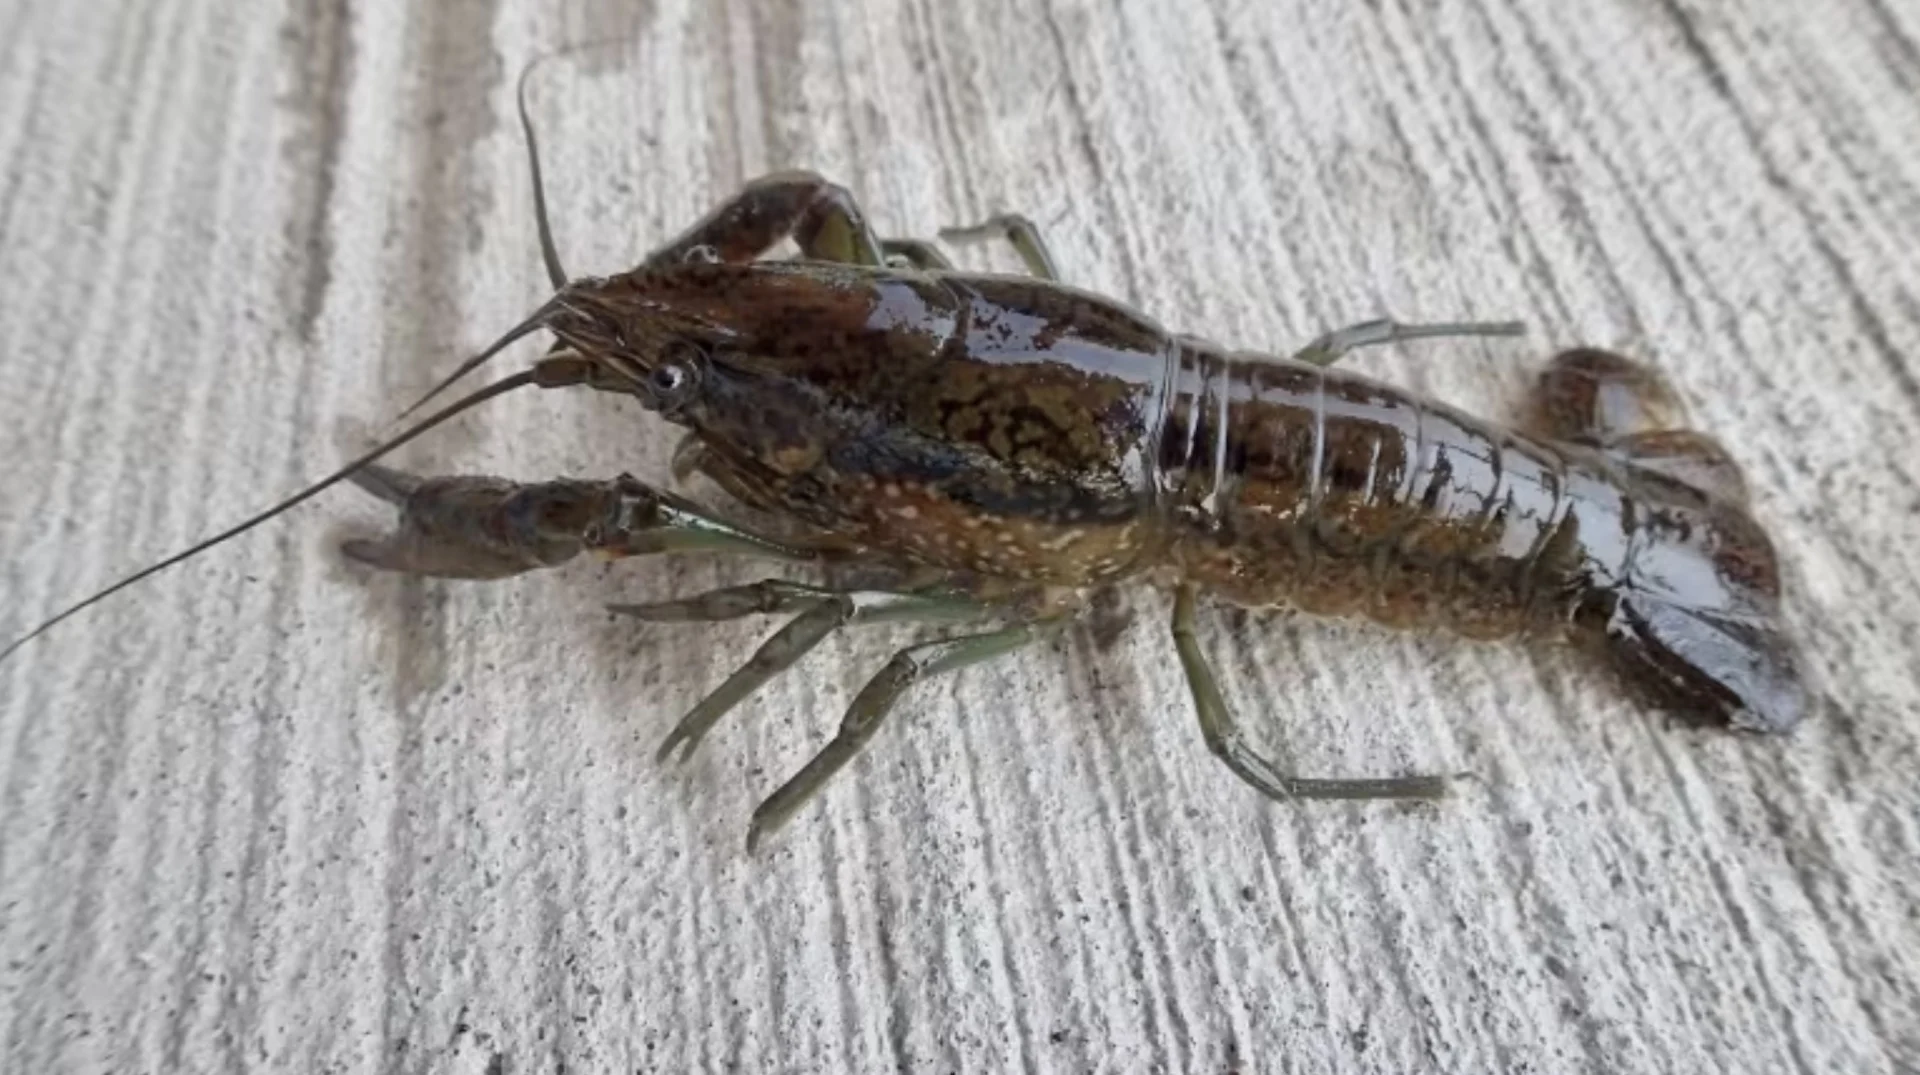 Scientists work to stop self-cloning crayfish after first detection in Canada